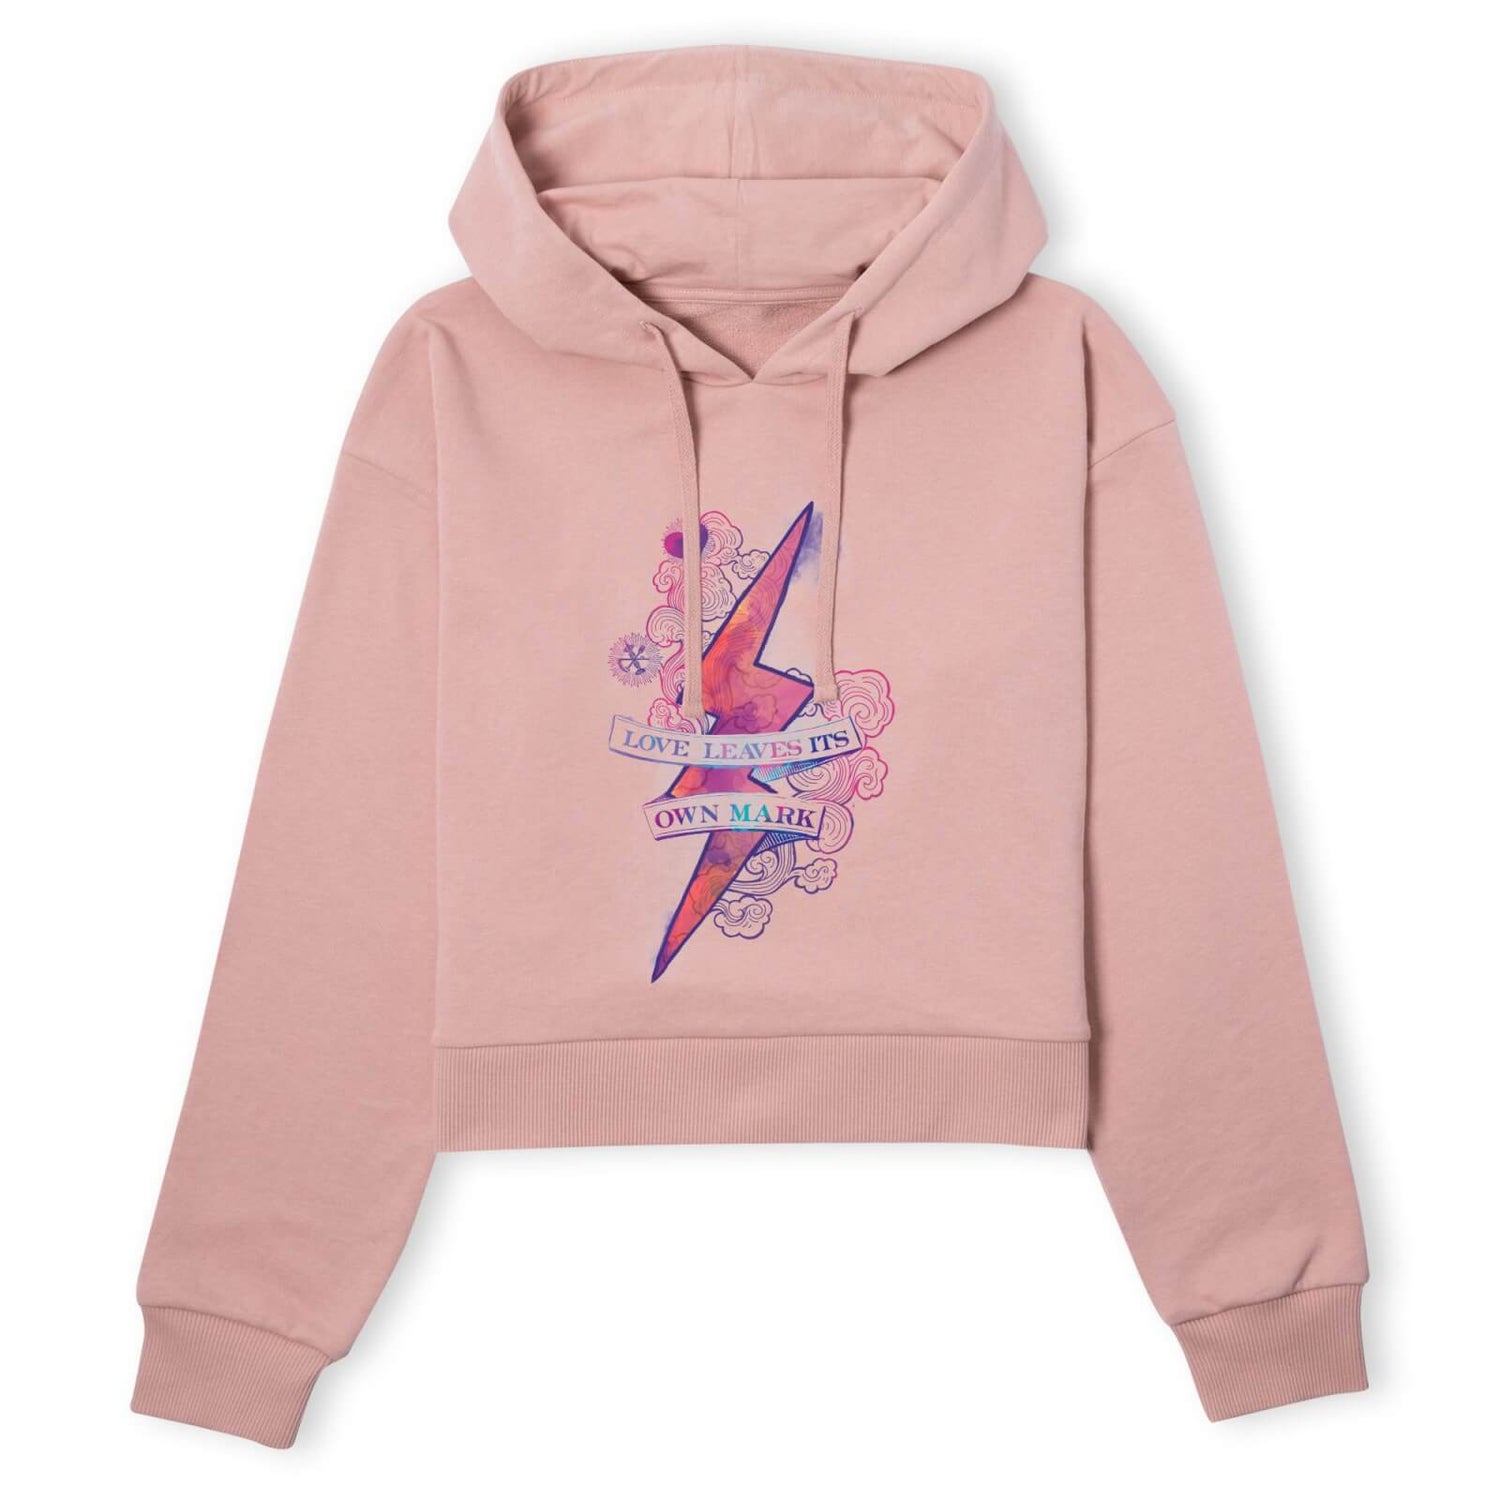 Harry Potter Love Leaves Its Own Mark Women's Cropped Hoodie - Dusty Pink